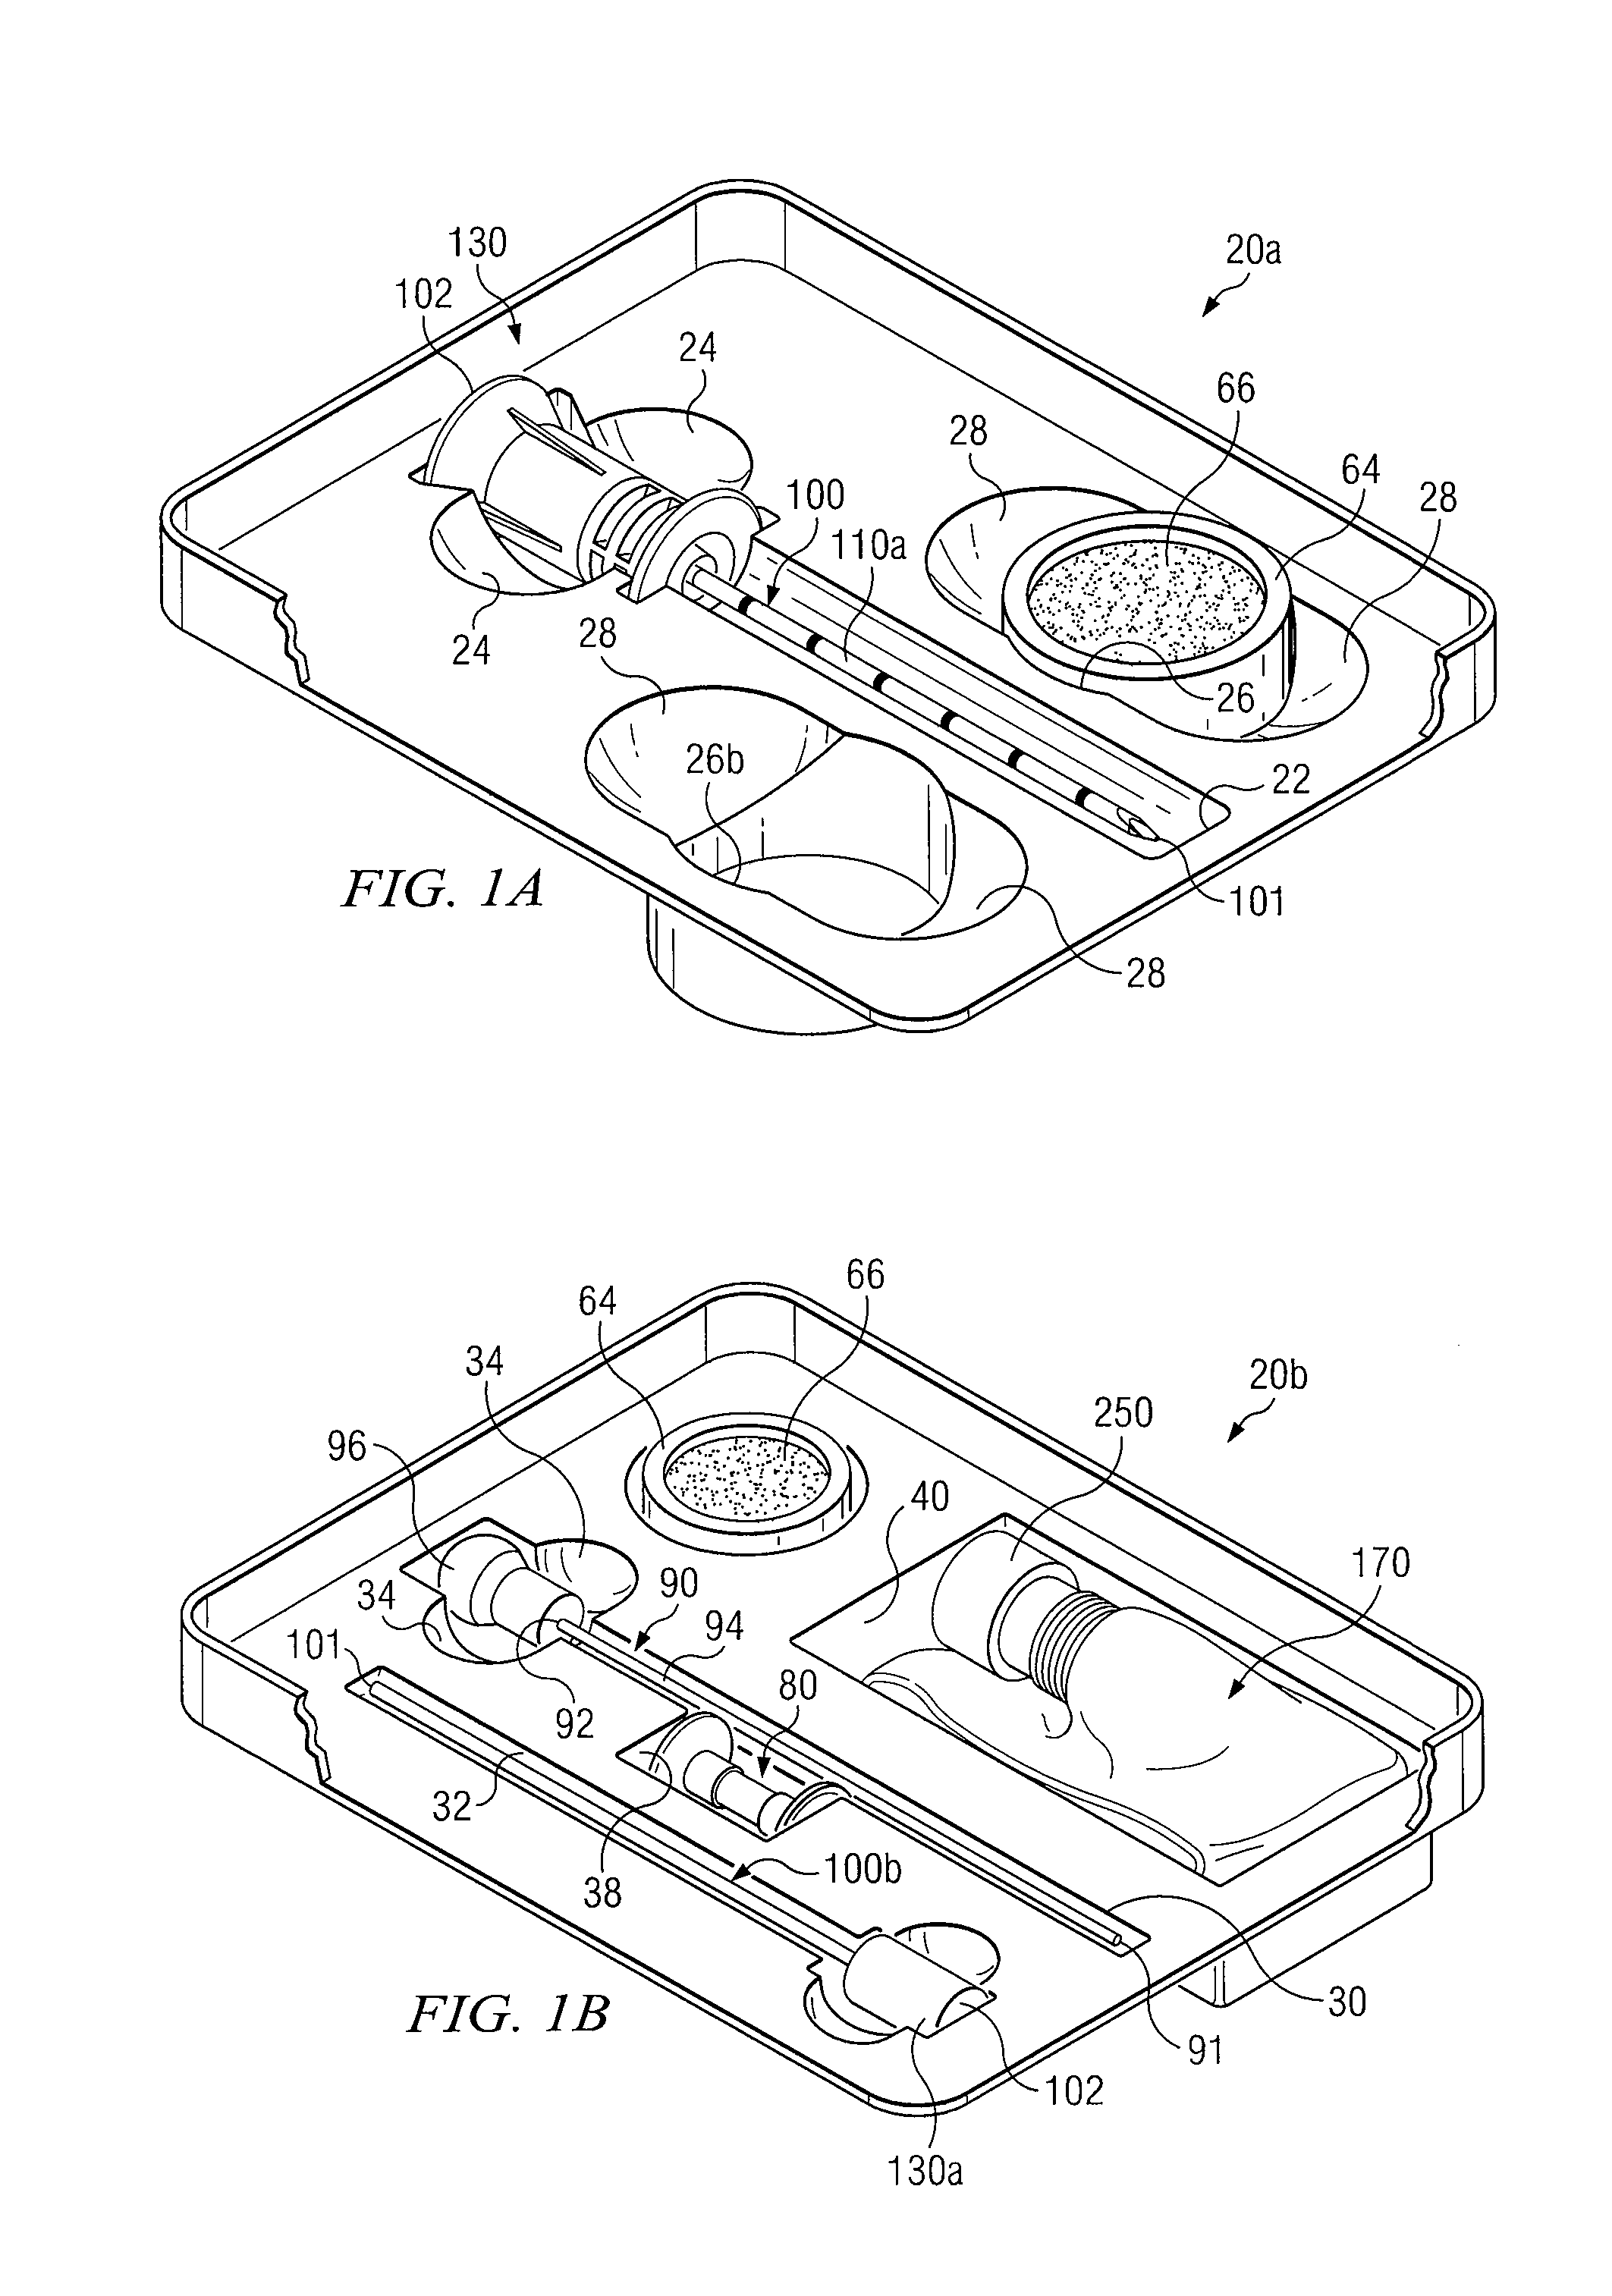 Assembly for coupling powered driver with intraosseous device